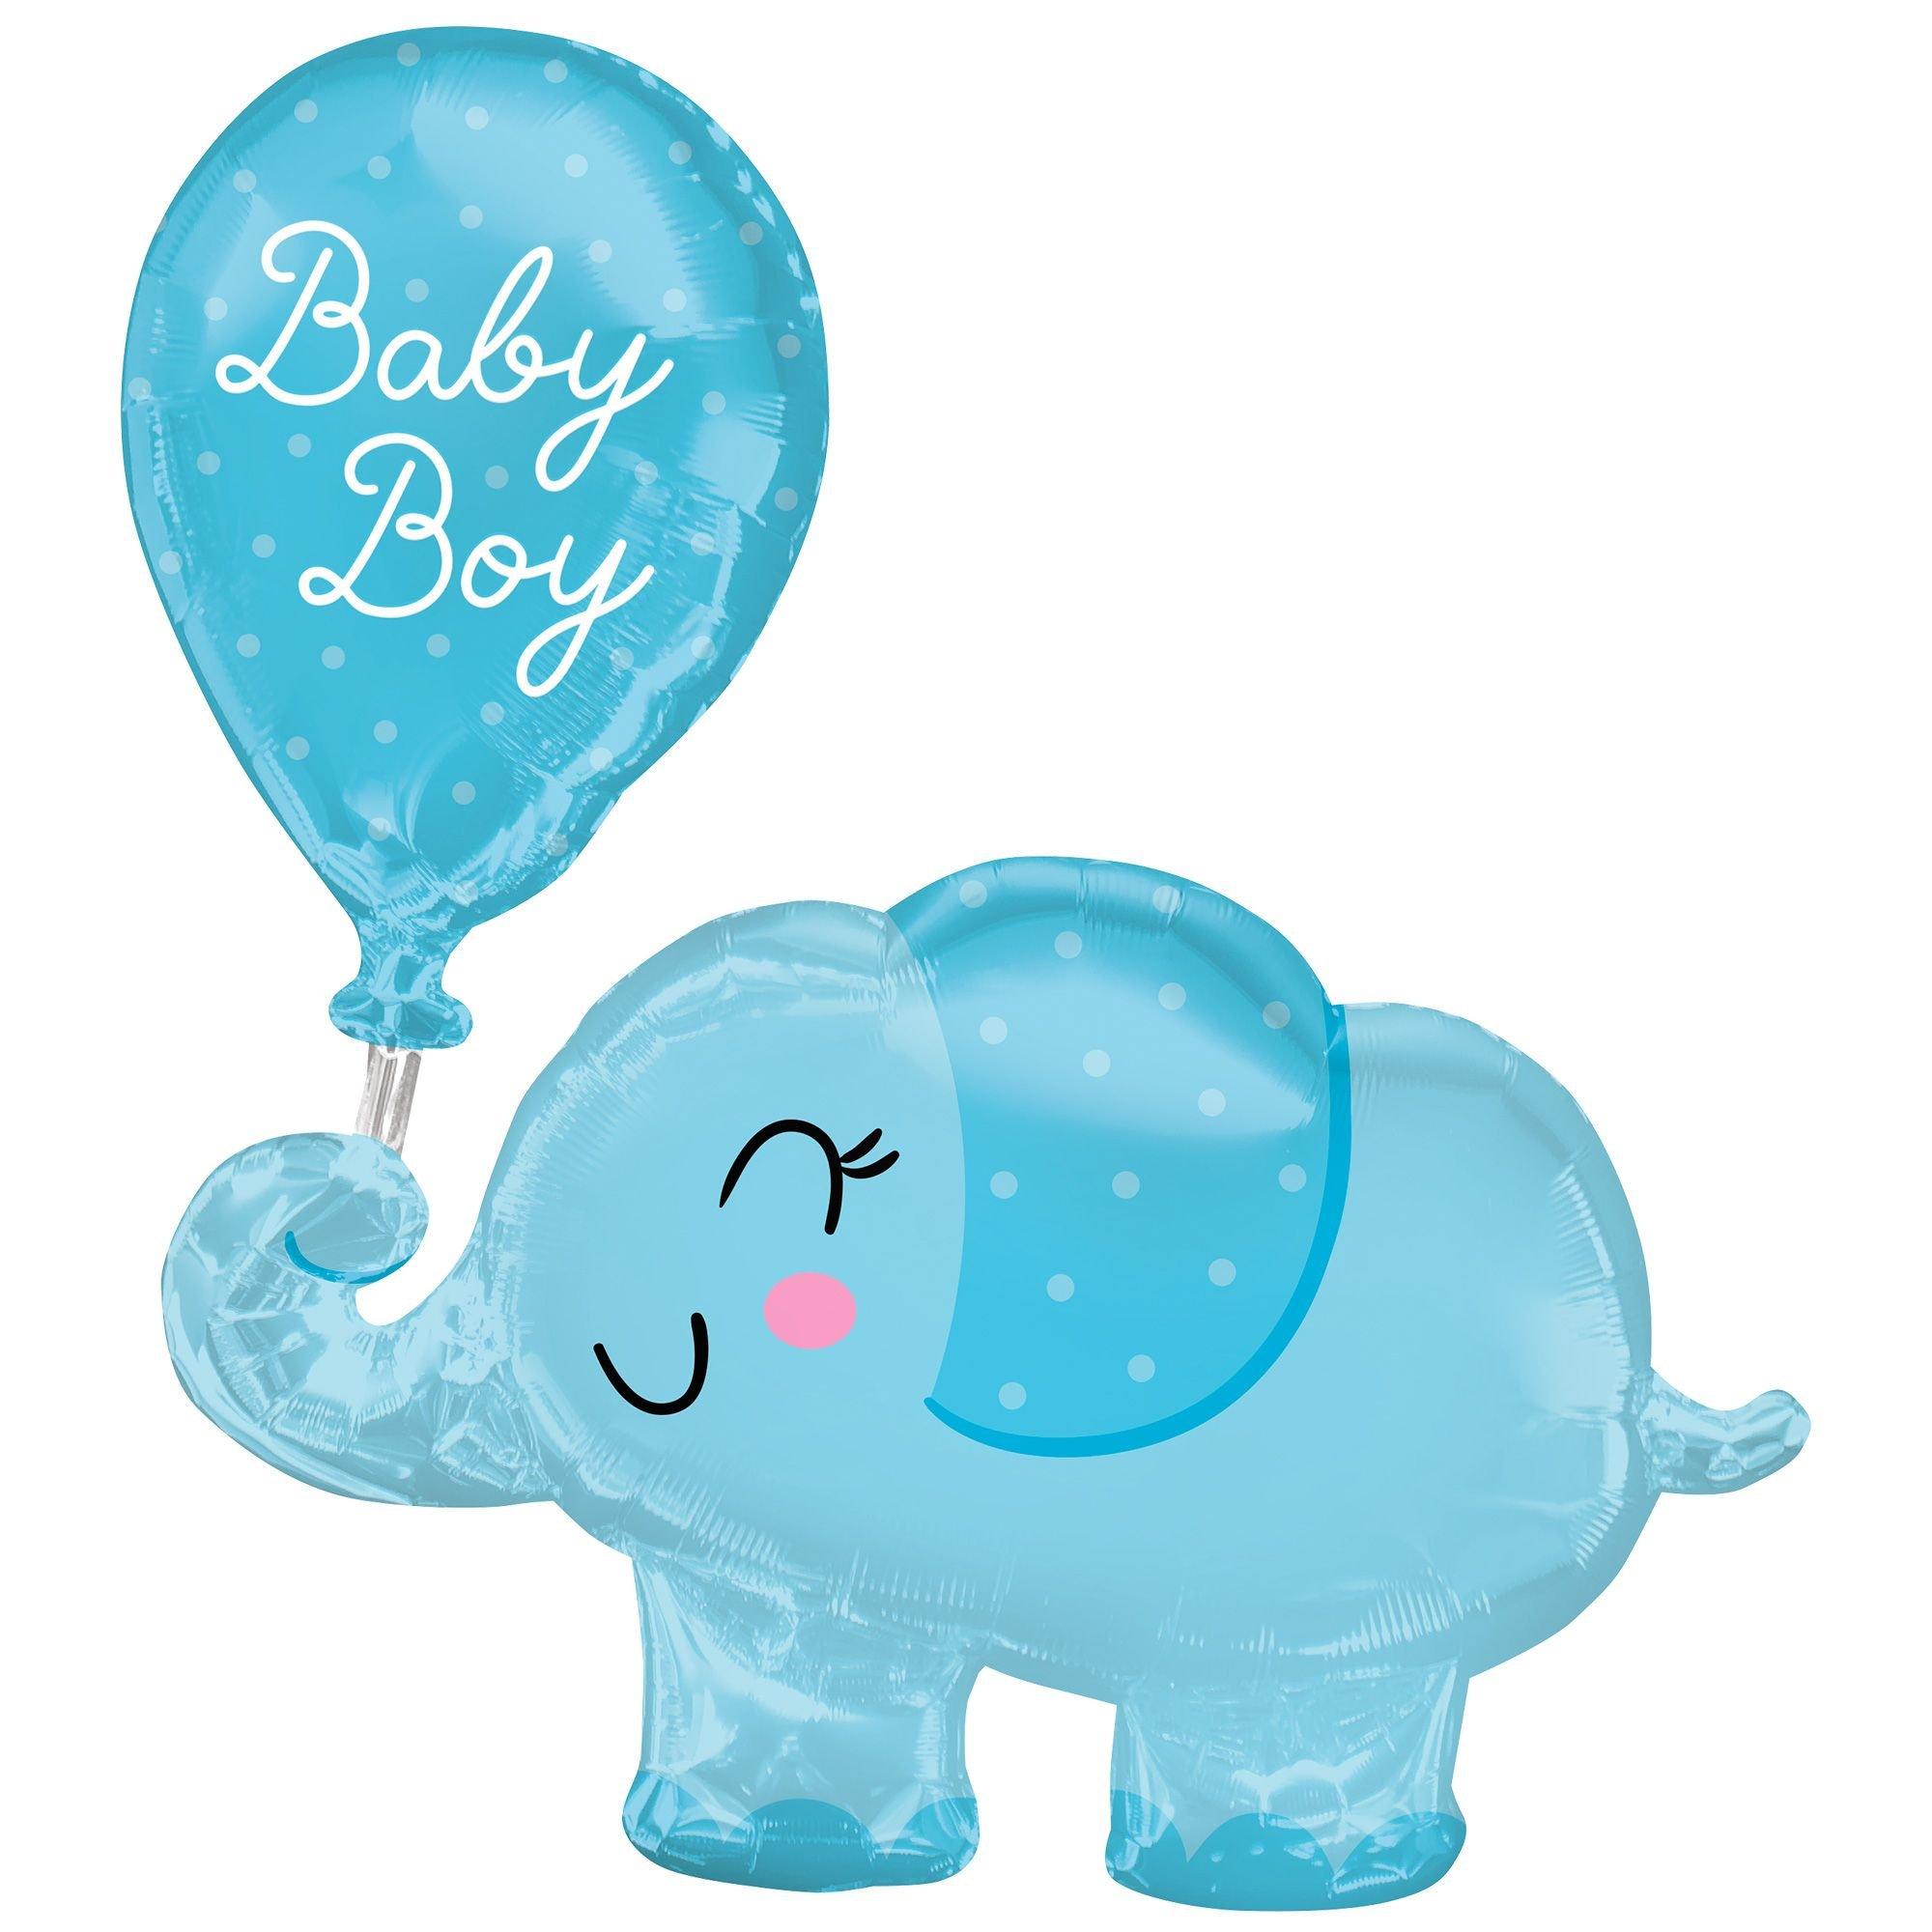 Its a boy. Cute blue funny animals toy baby shower Wrapping Paper